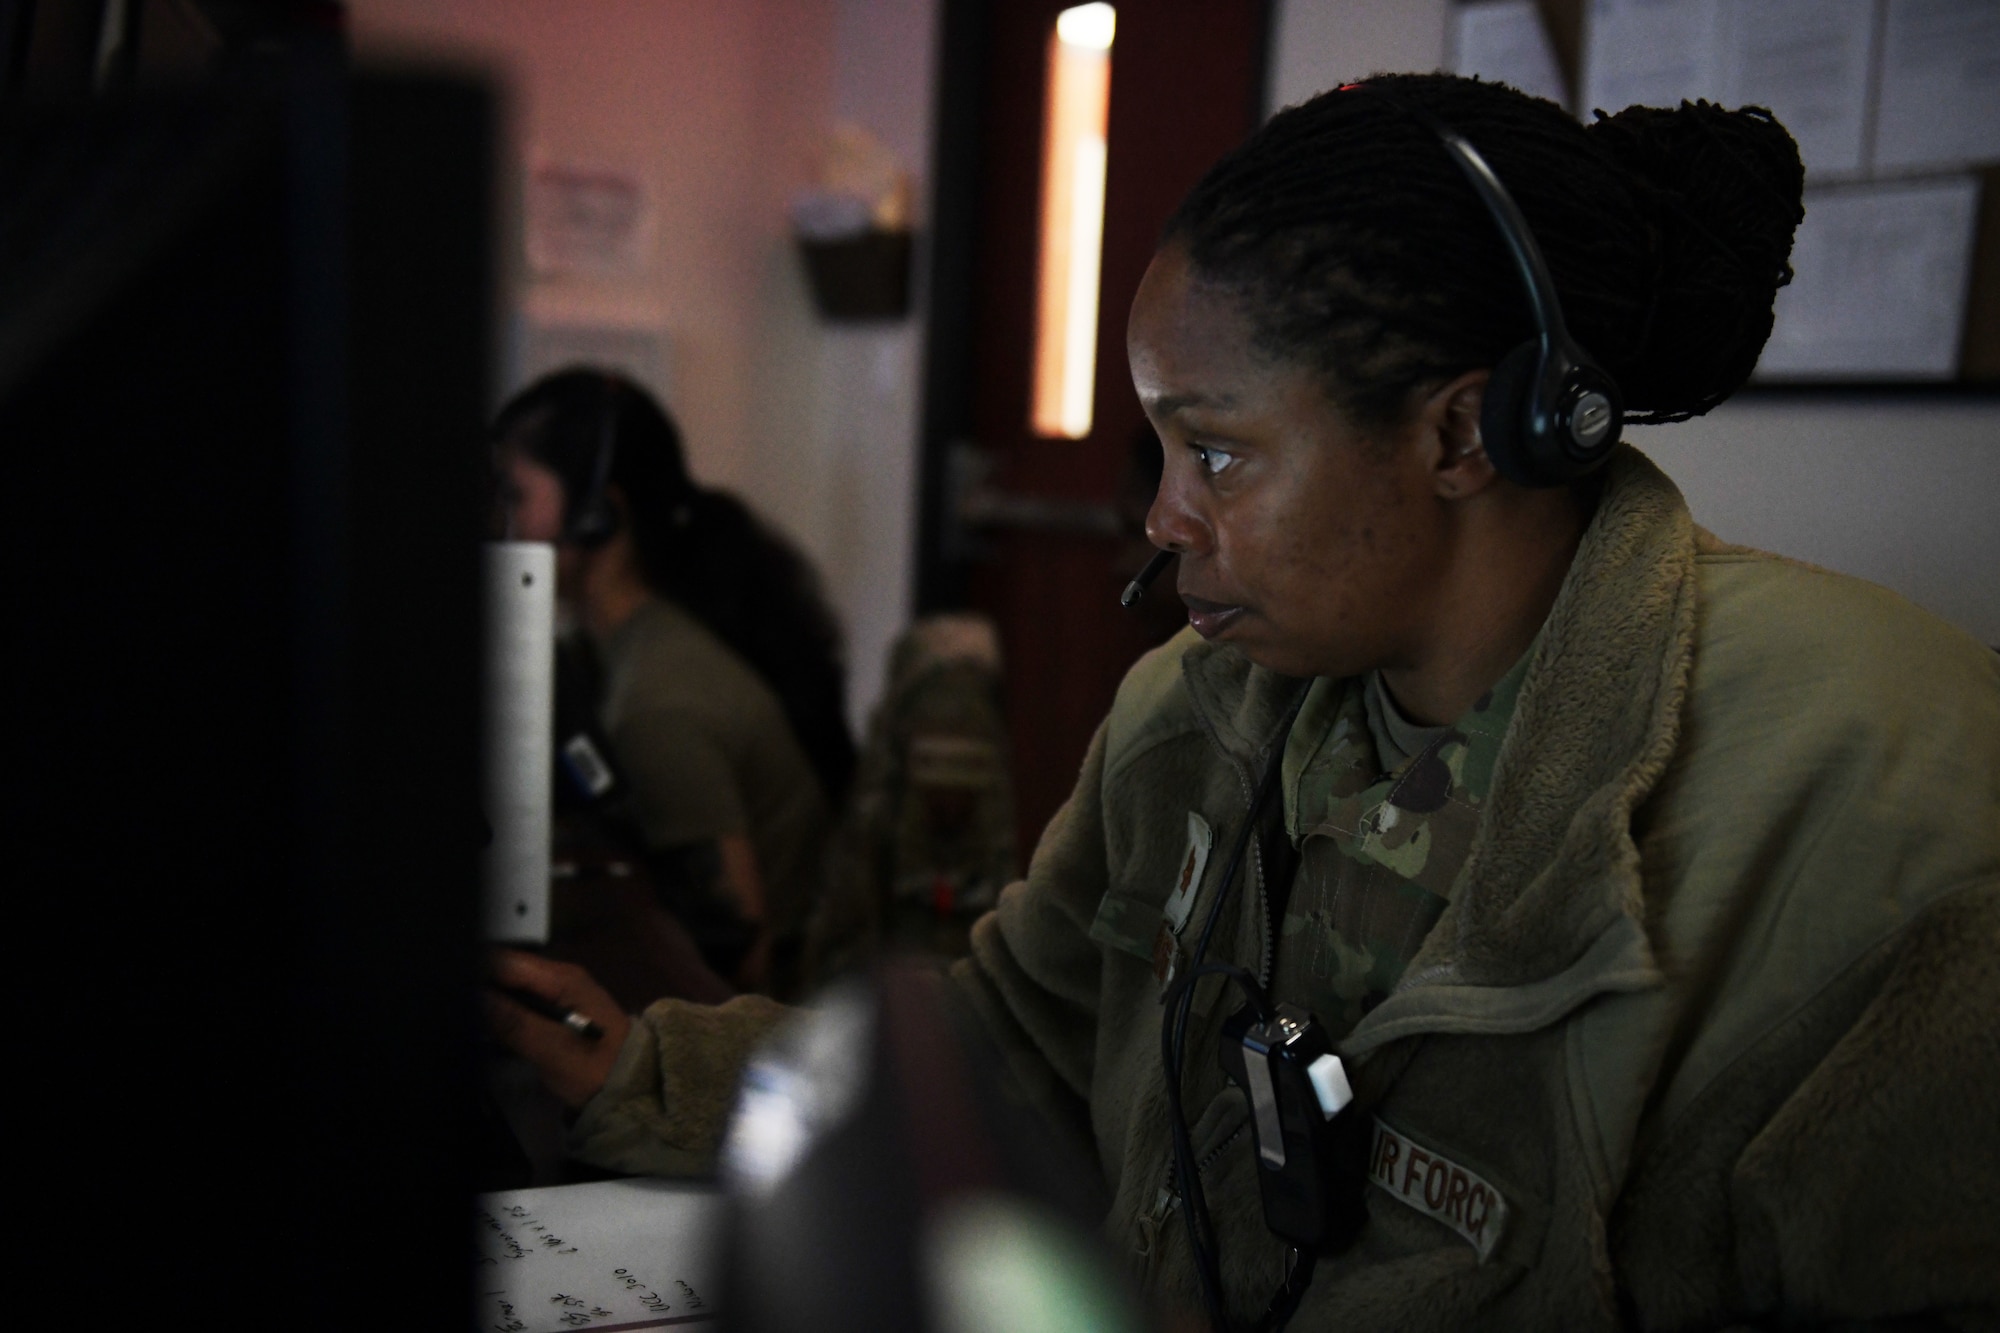 U.S. Air Force Maj. Jasmine Bogard, 81st Air Control Squadron assistant director of operations, performs the role of mission director during an all-female command and control mission during Weapons System Evaluation Program East 22.06 at Tyndall Air Force Base, Florida, March 29, 2022.